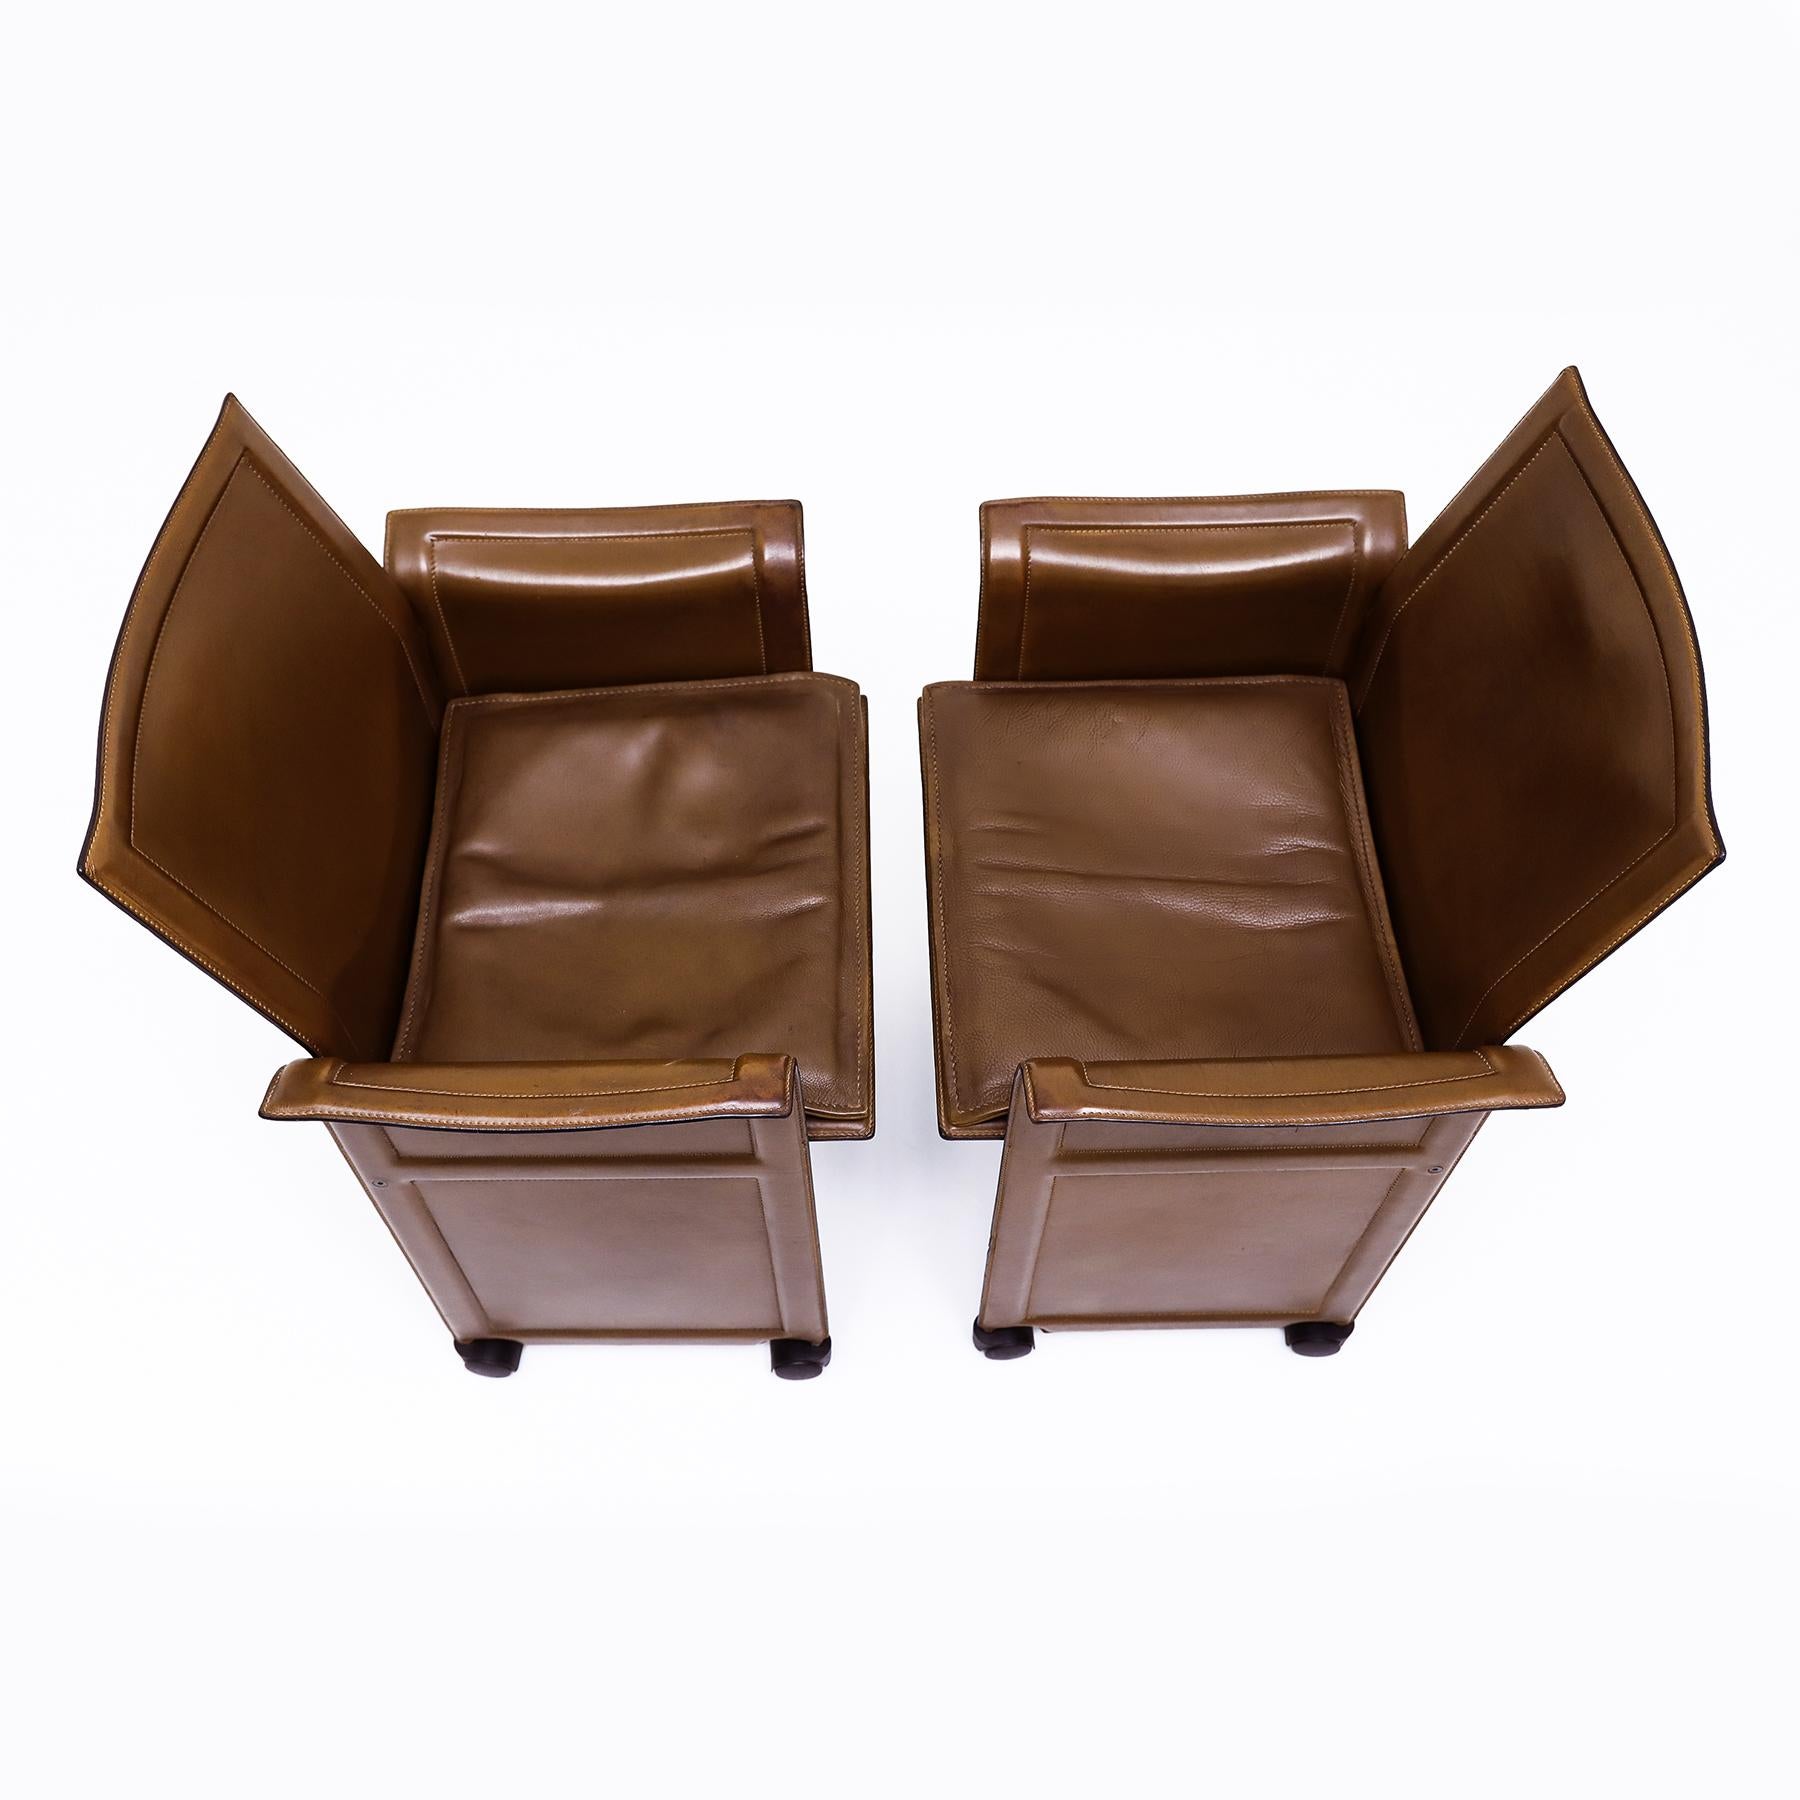 Late 20th Century Vintage Italian leather Korium armchairs by Tito Agnoli for Matteo Grassi For Sale